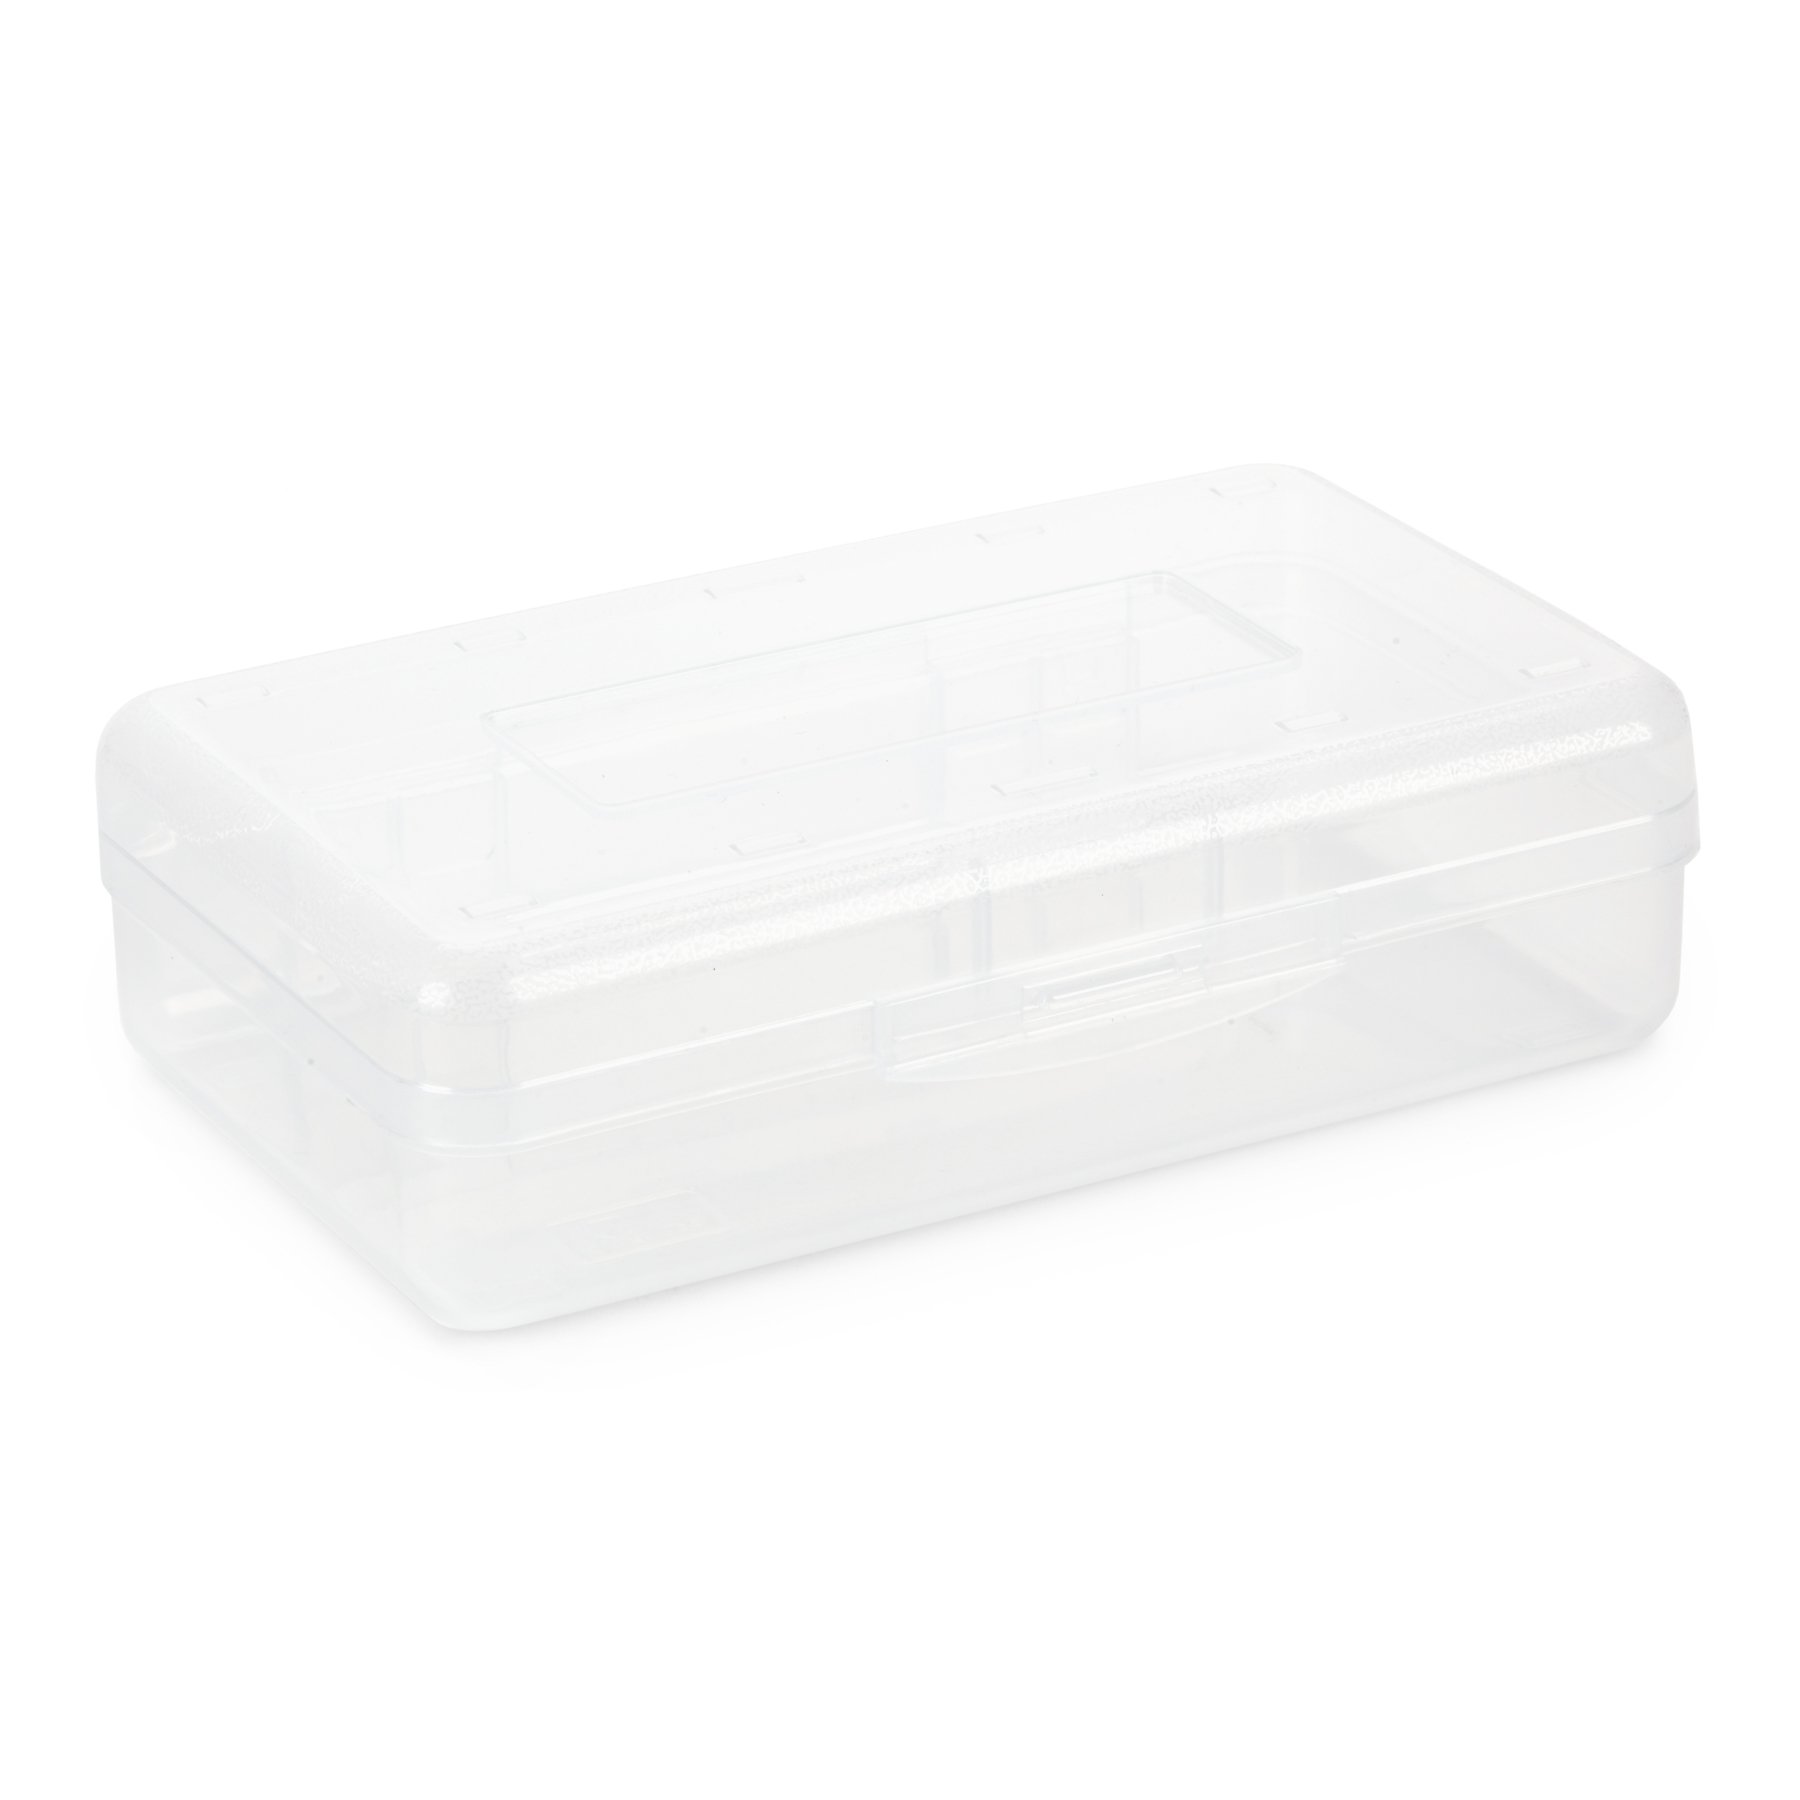 Blue Summit Supplies Clear Plastic Pencil Boxes, Translucent Pencil Boxes for School, Crayon and Marker Boxes with Hinged Lids for Classroom or